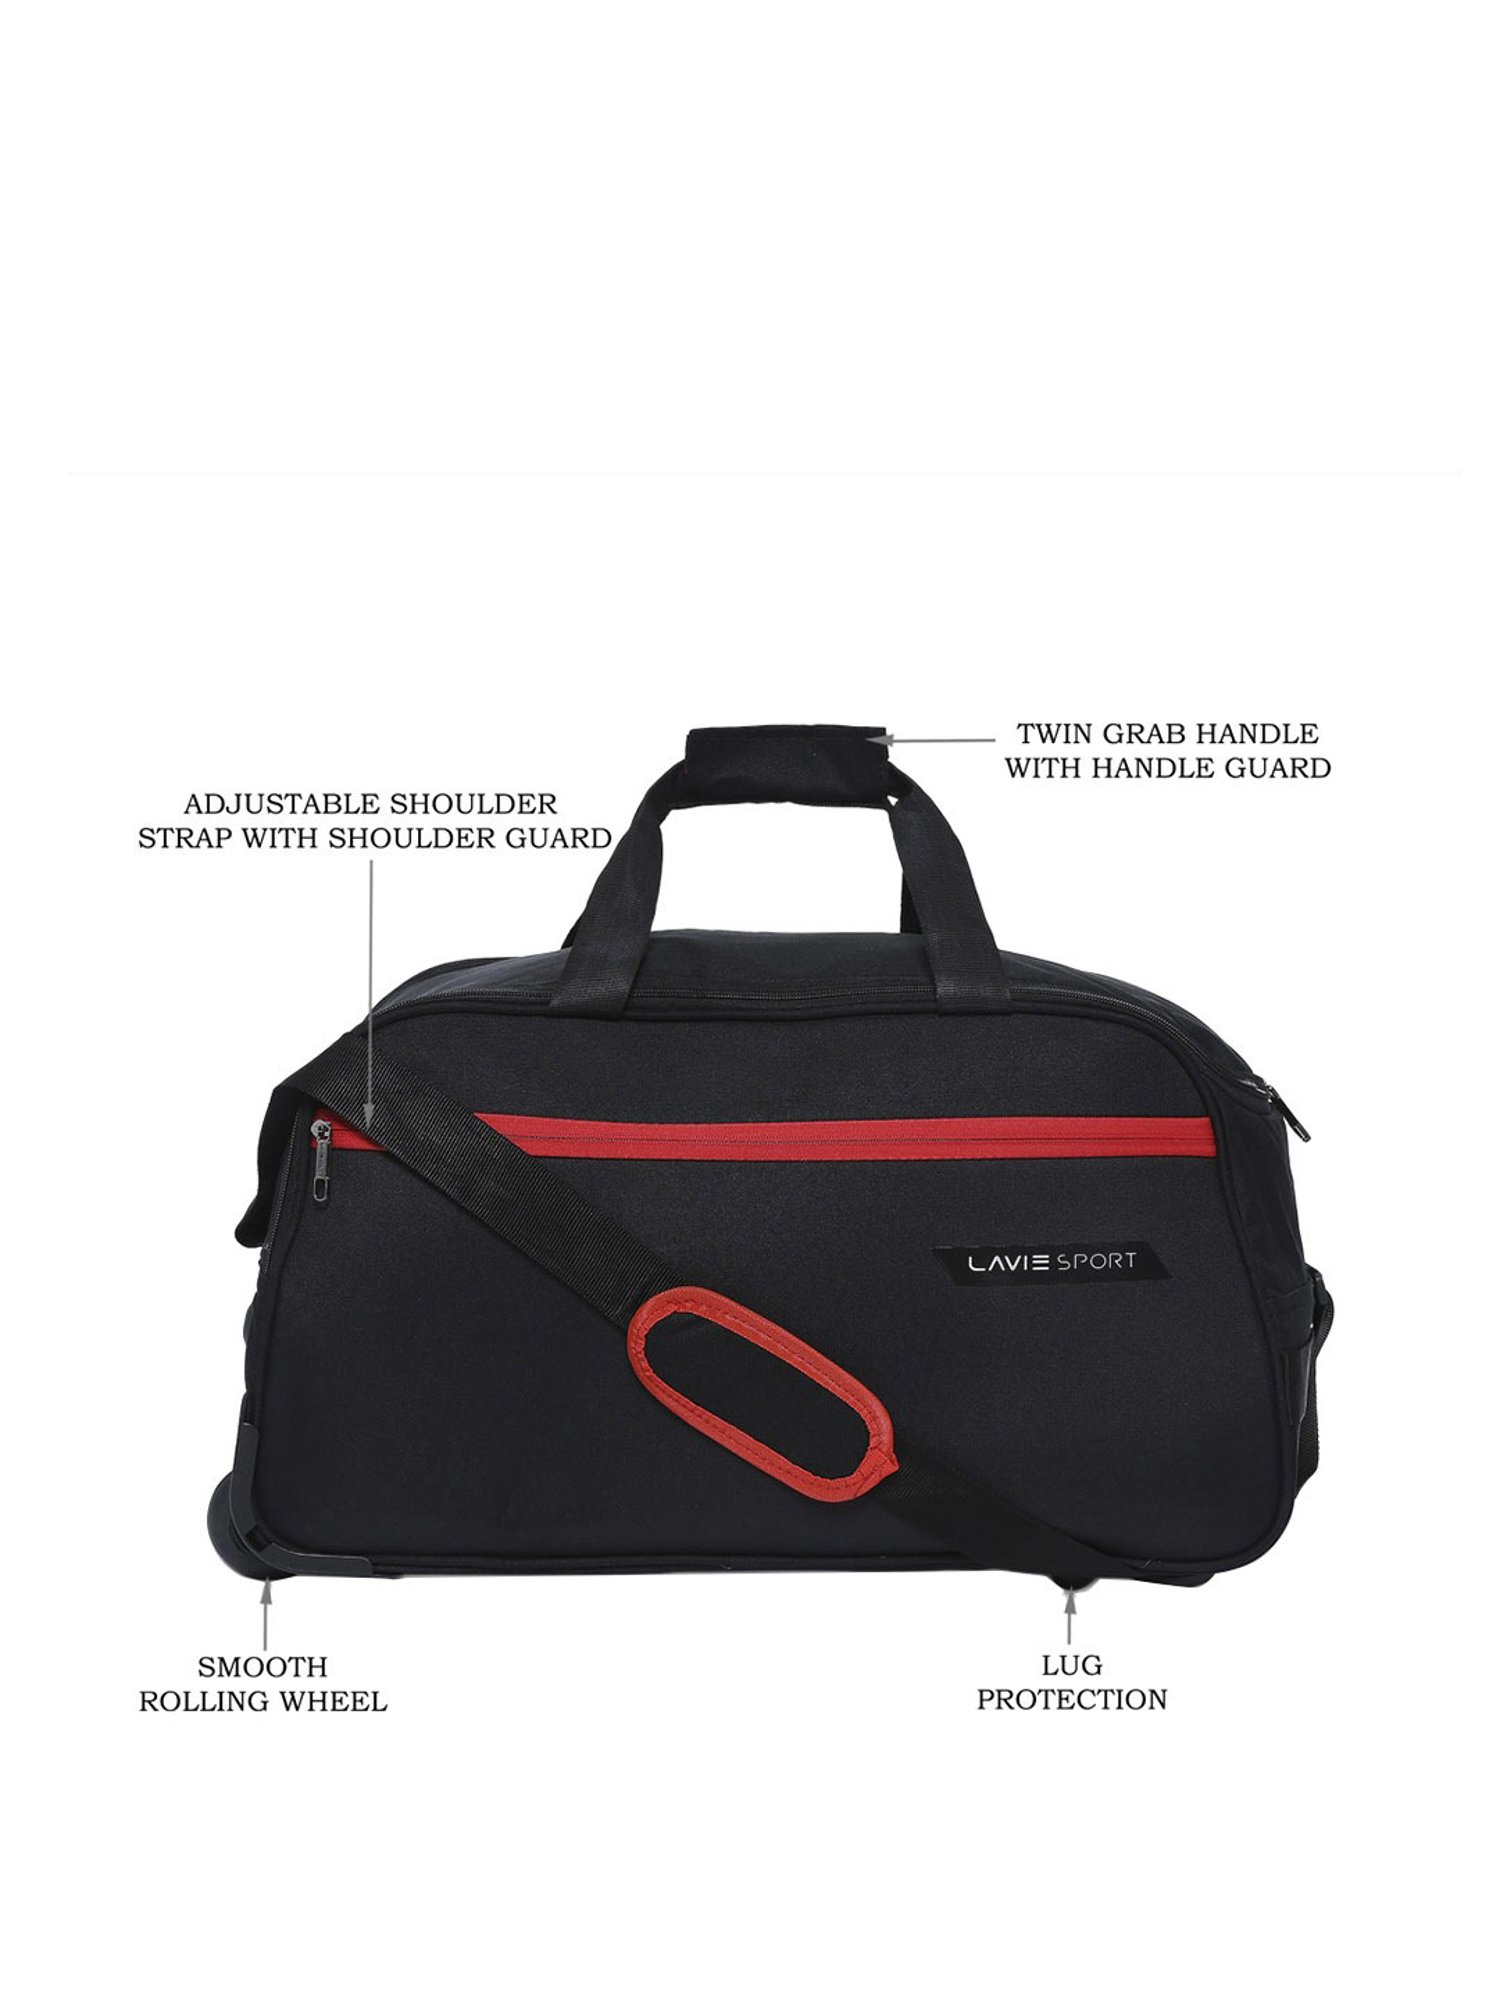 Wander In Style with durable LAVIE SPORT Backpacks and Duffle Bags